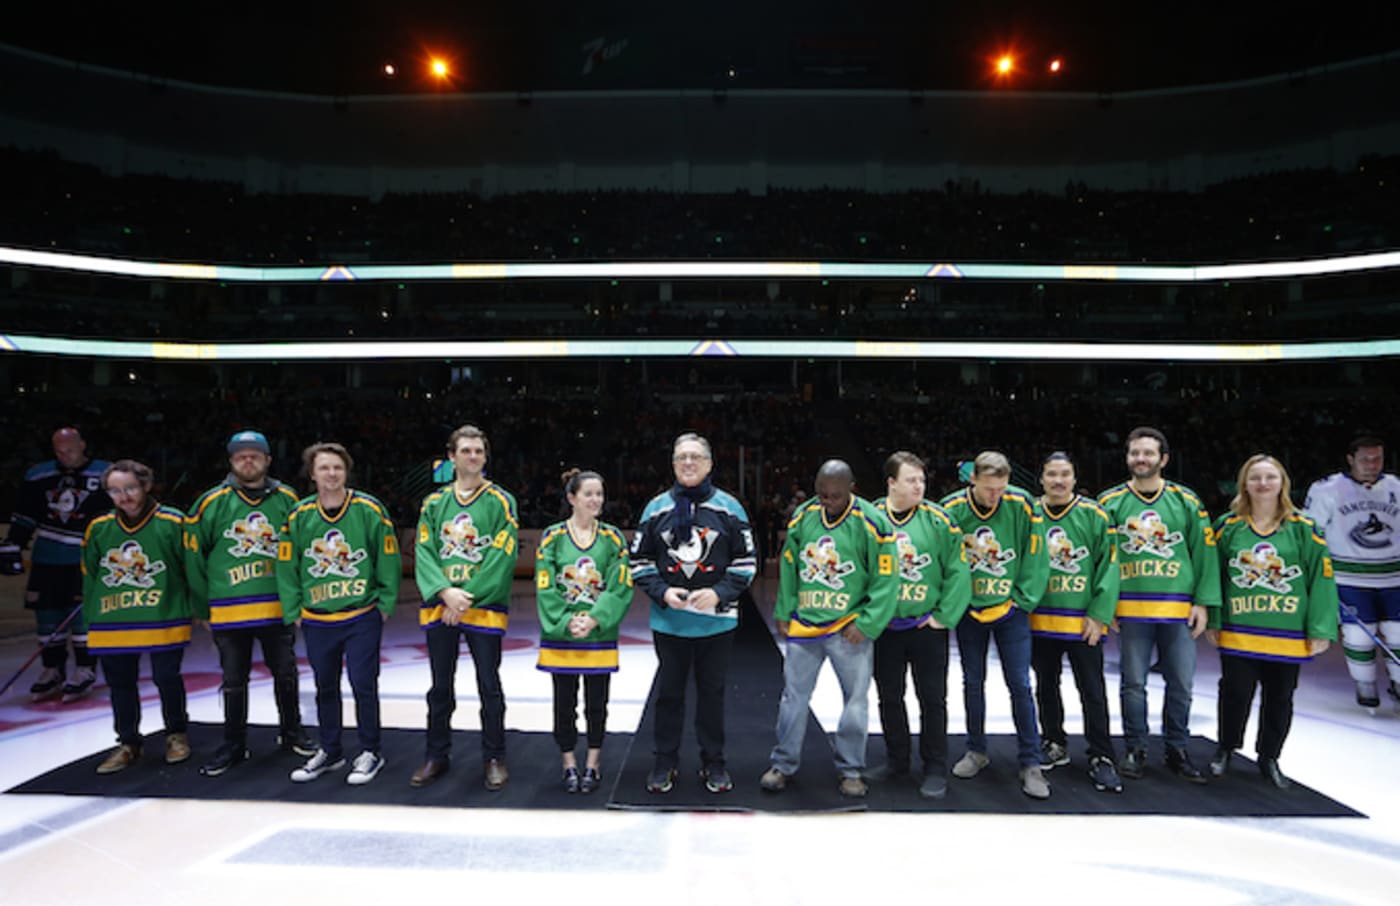 Members of the cast and crew from the original Mighty Ducks movie.